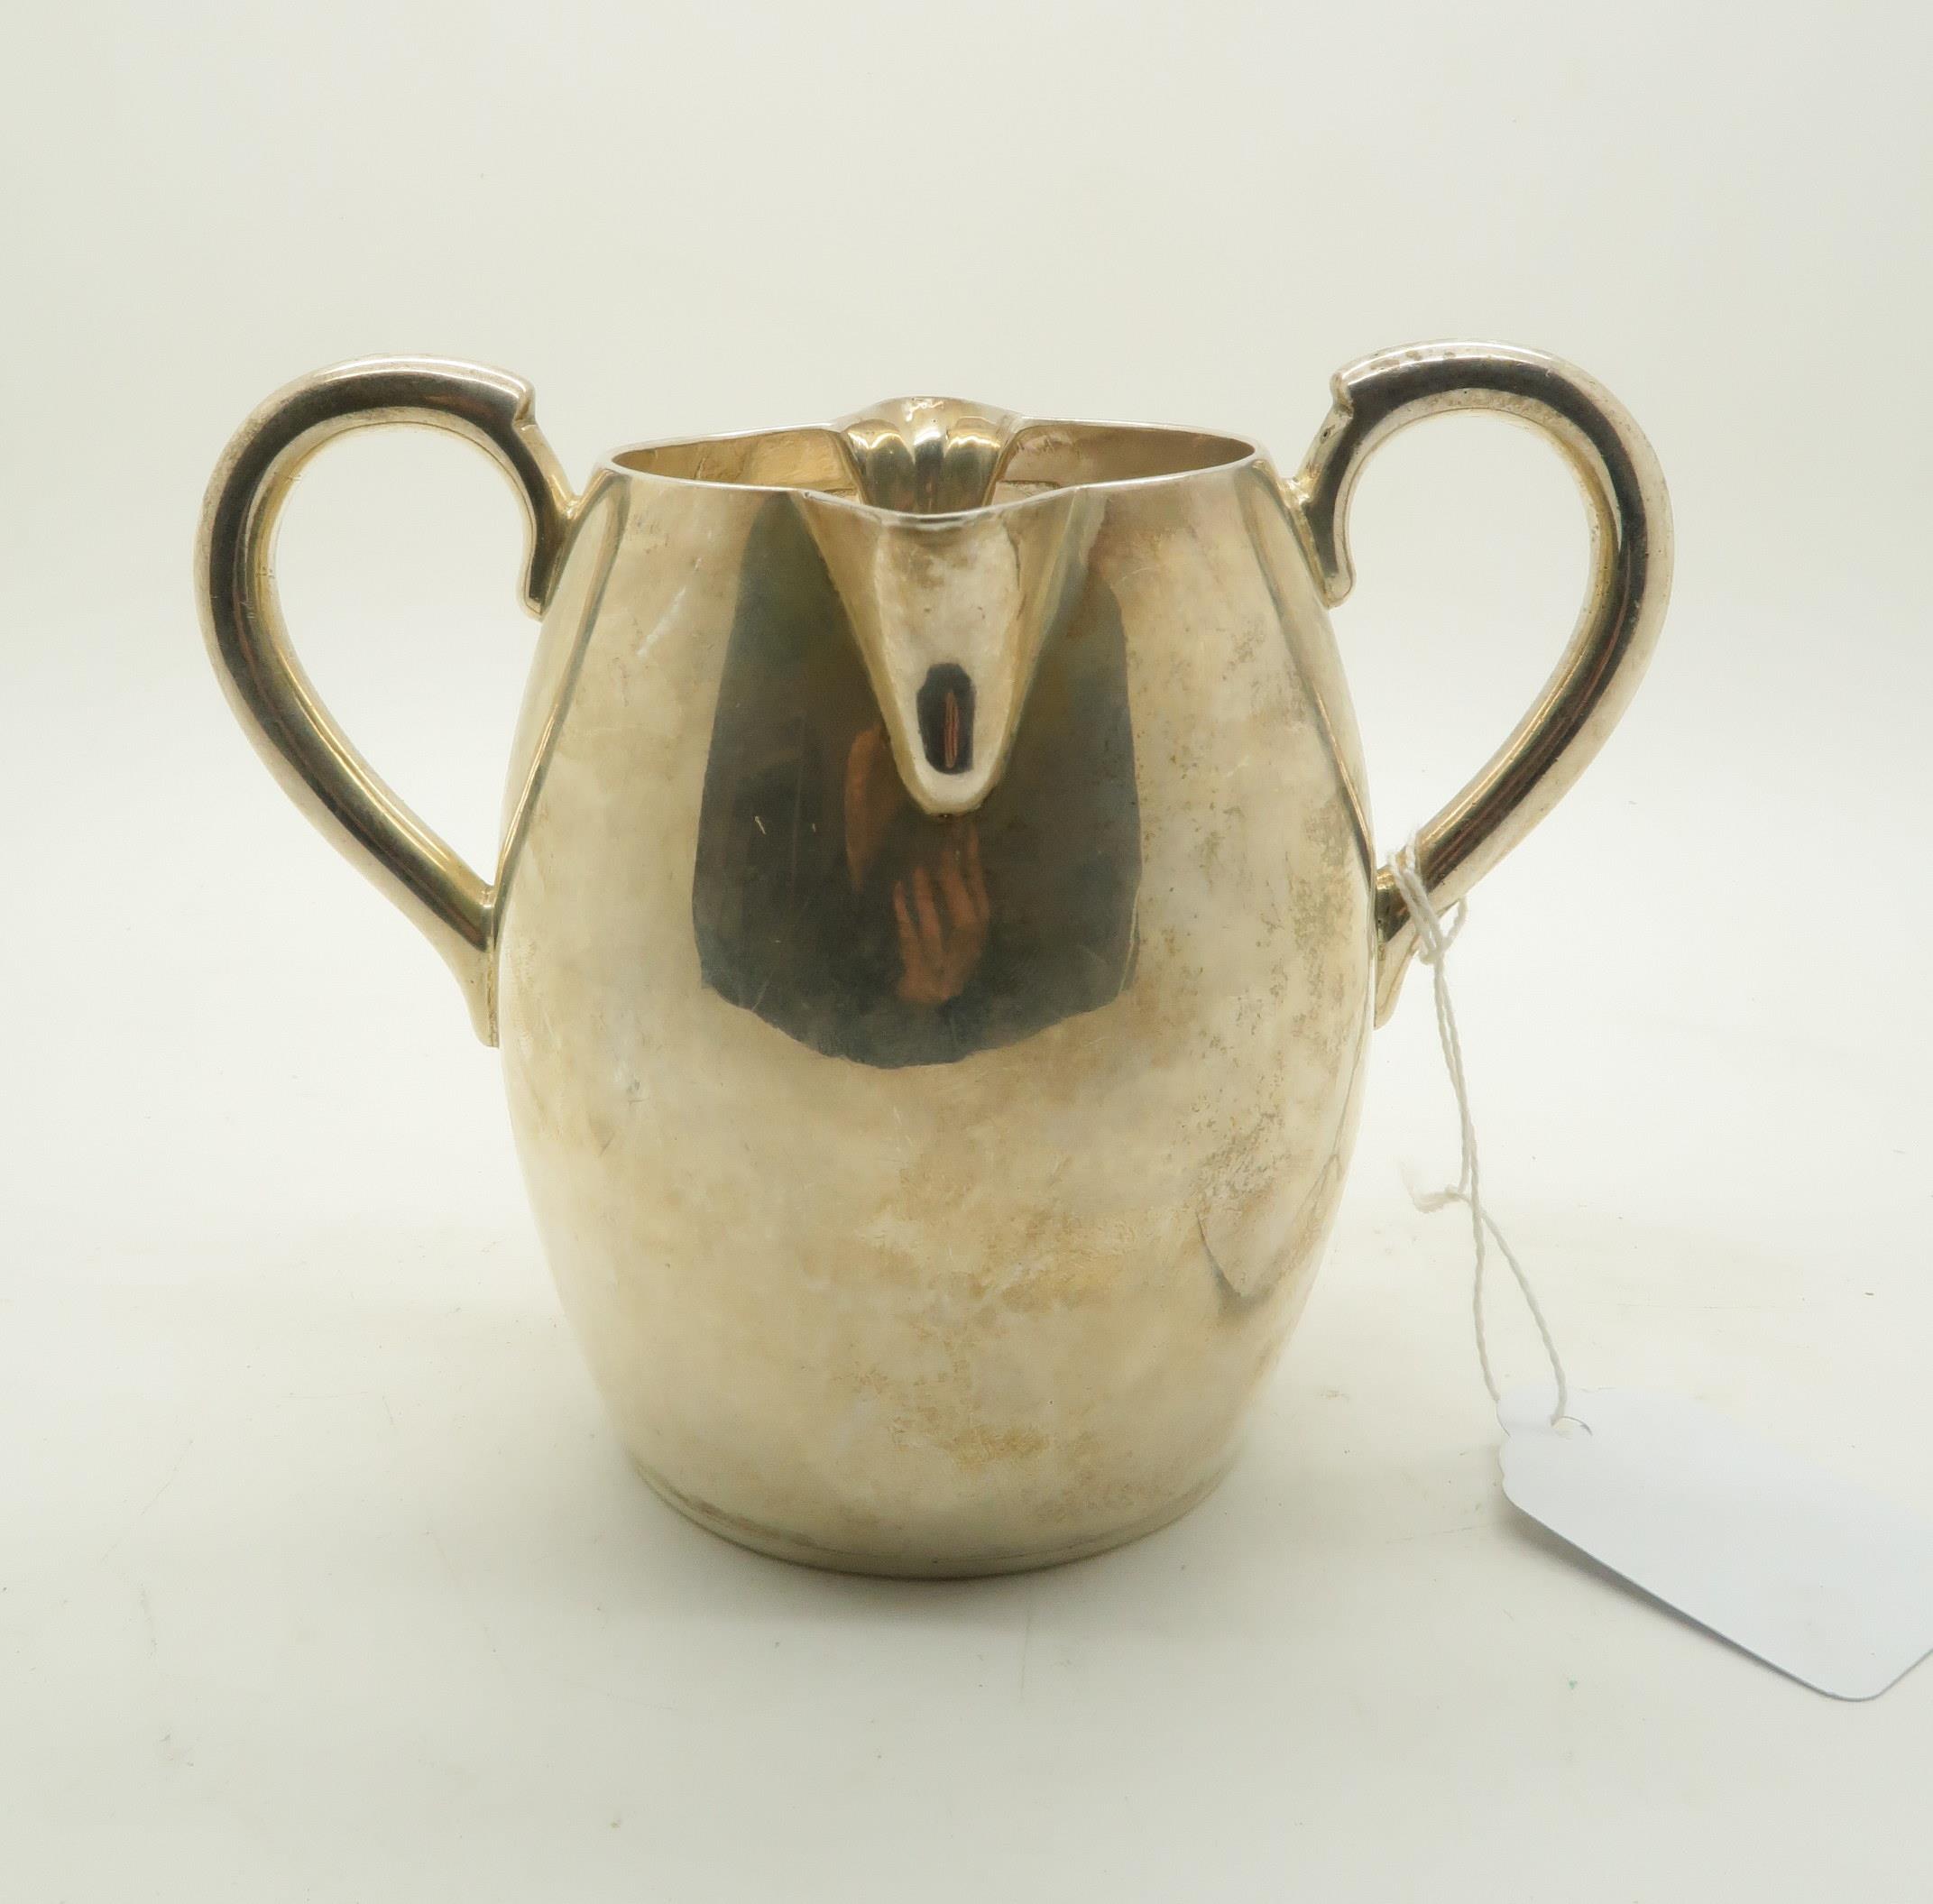 *WITHDRAWN* A George II silver double spout cream jug, with two handles, London 1750, makers